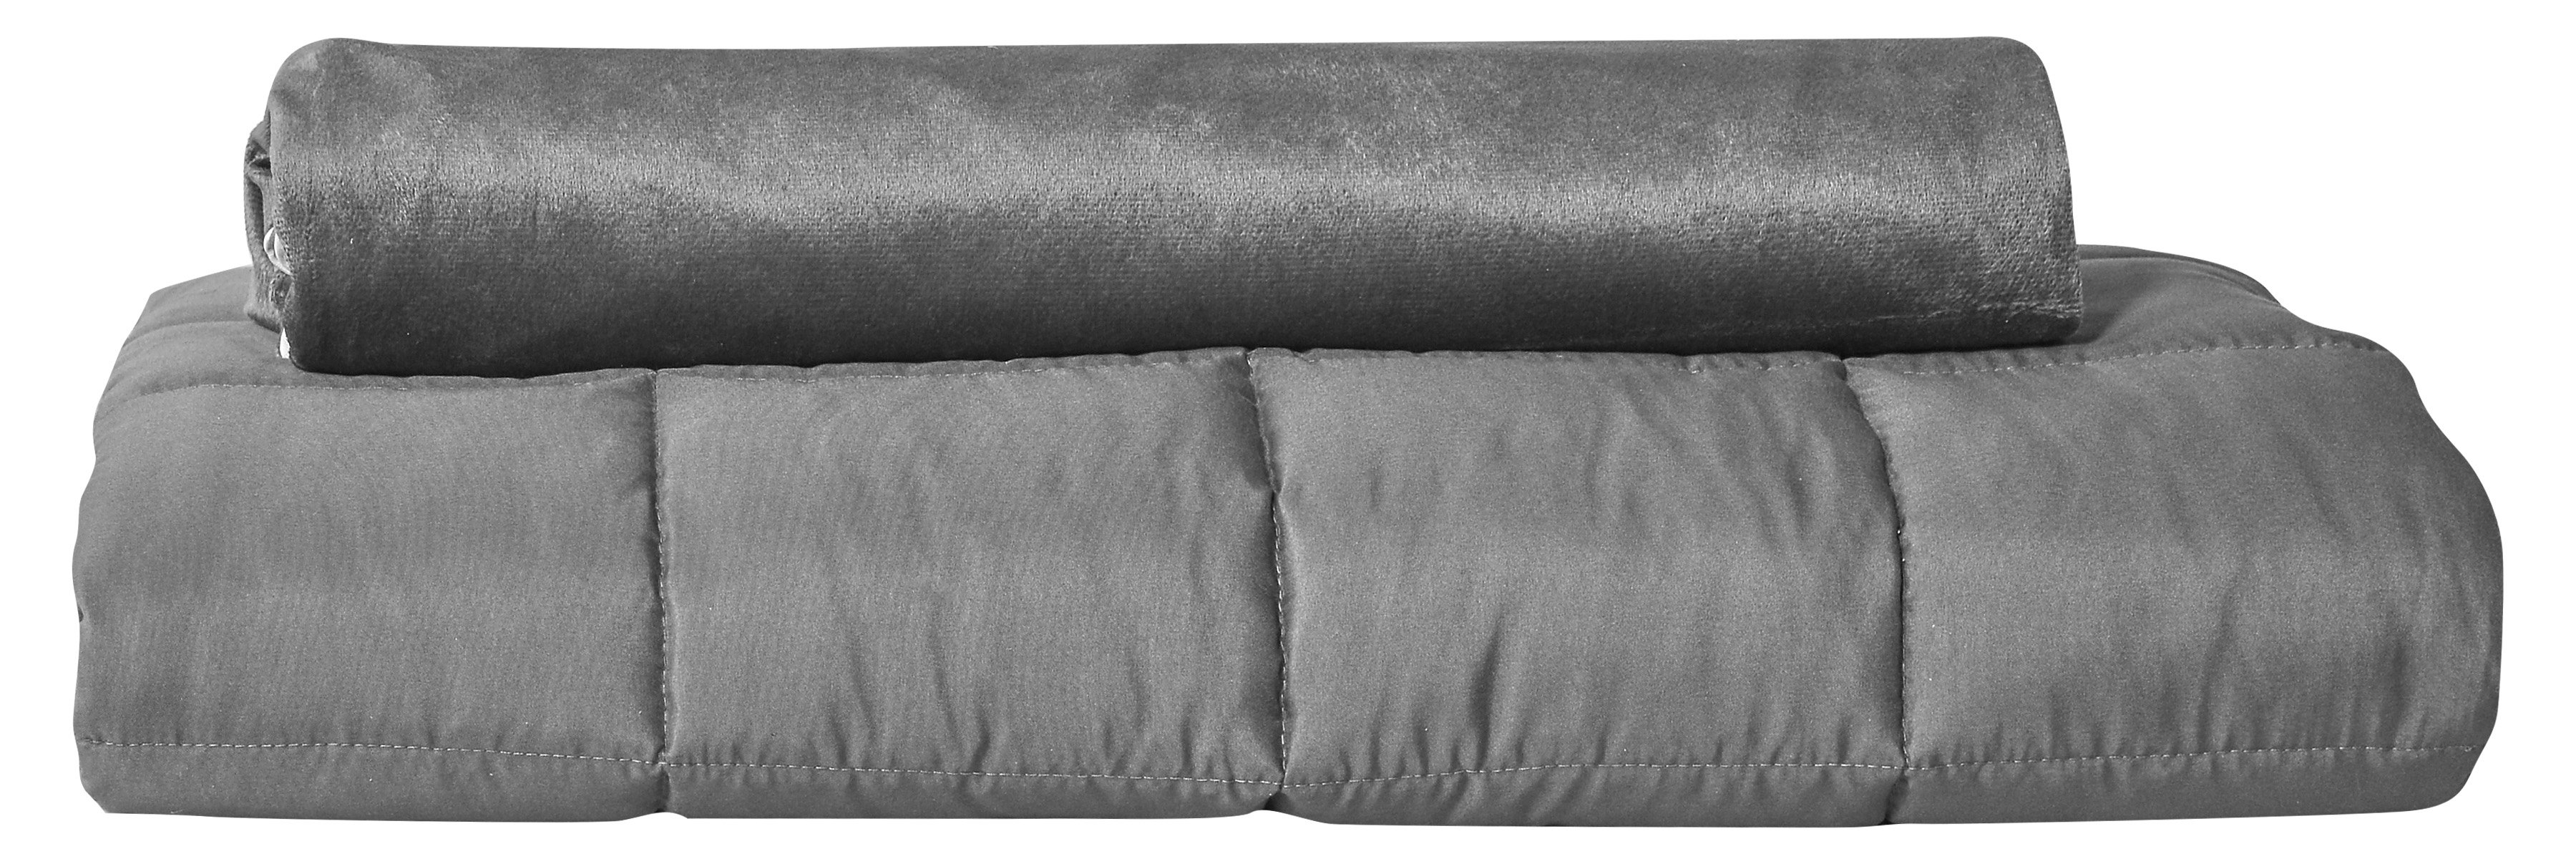 Tranquility Temperature Balancing Weighted Blanket with Washable Cover, 18 lbs - image 9 of 10